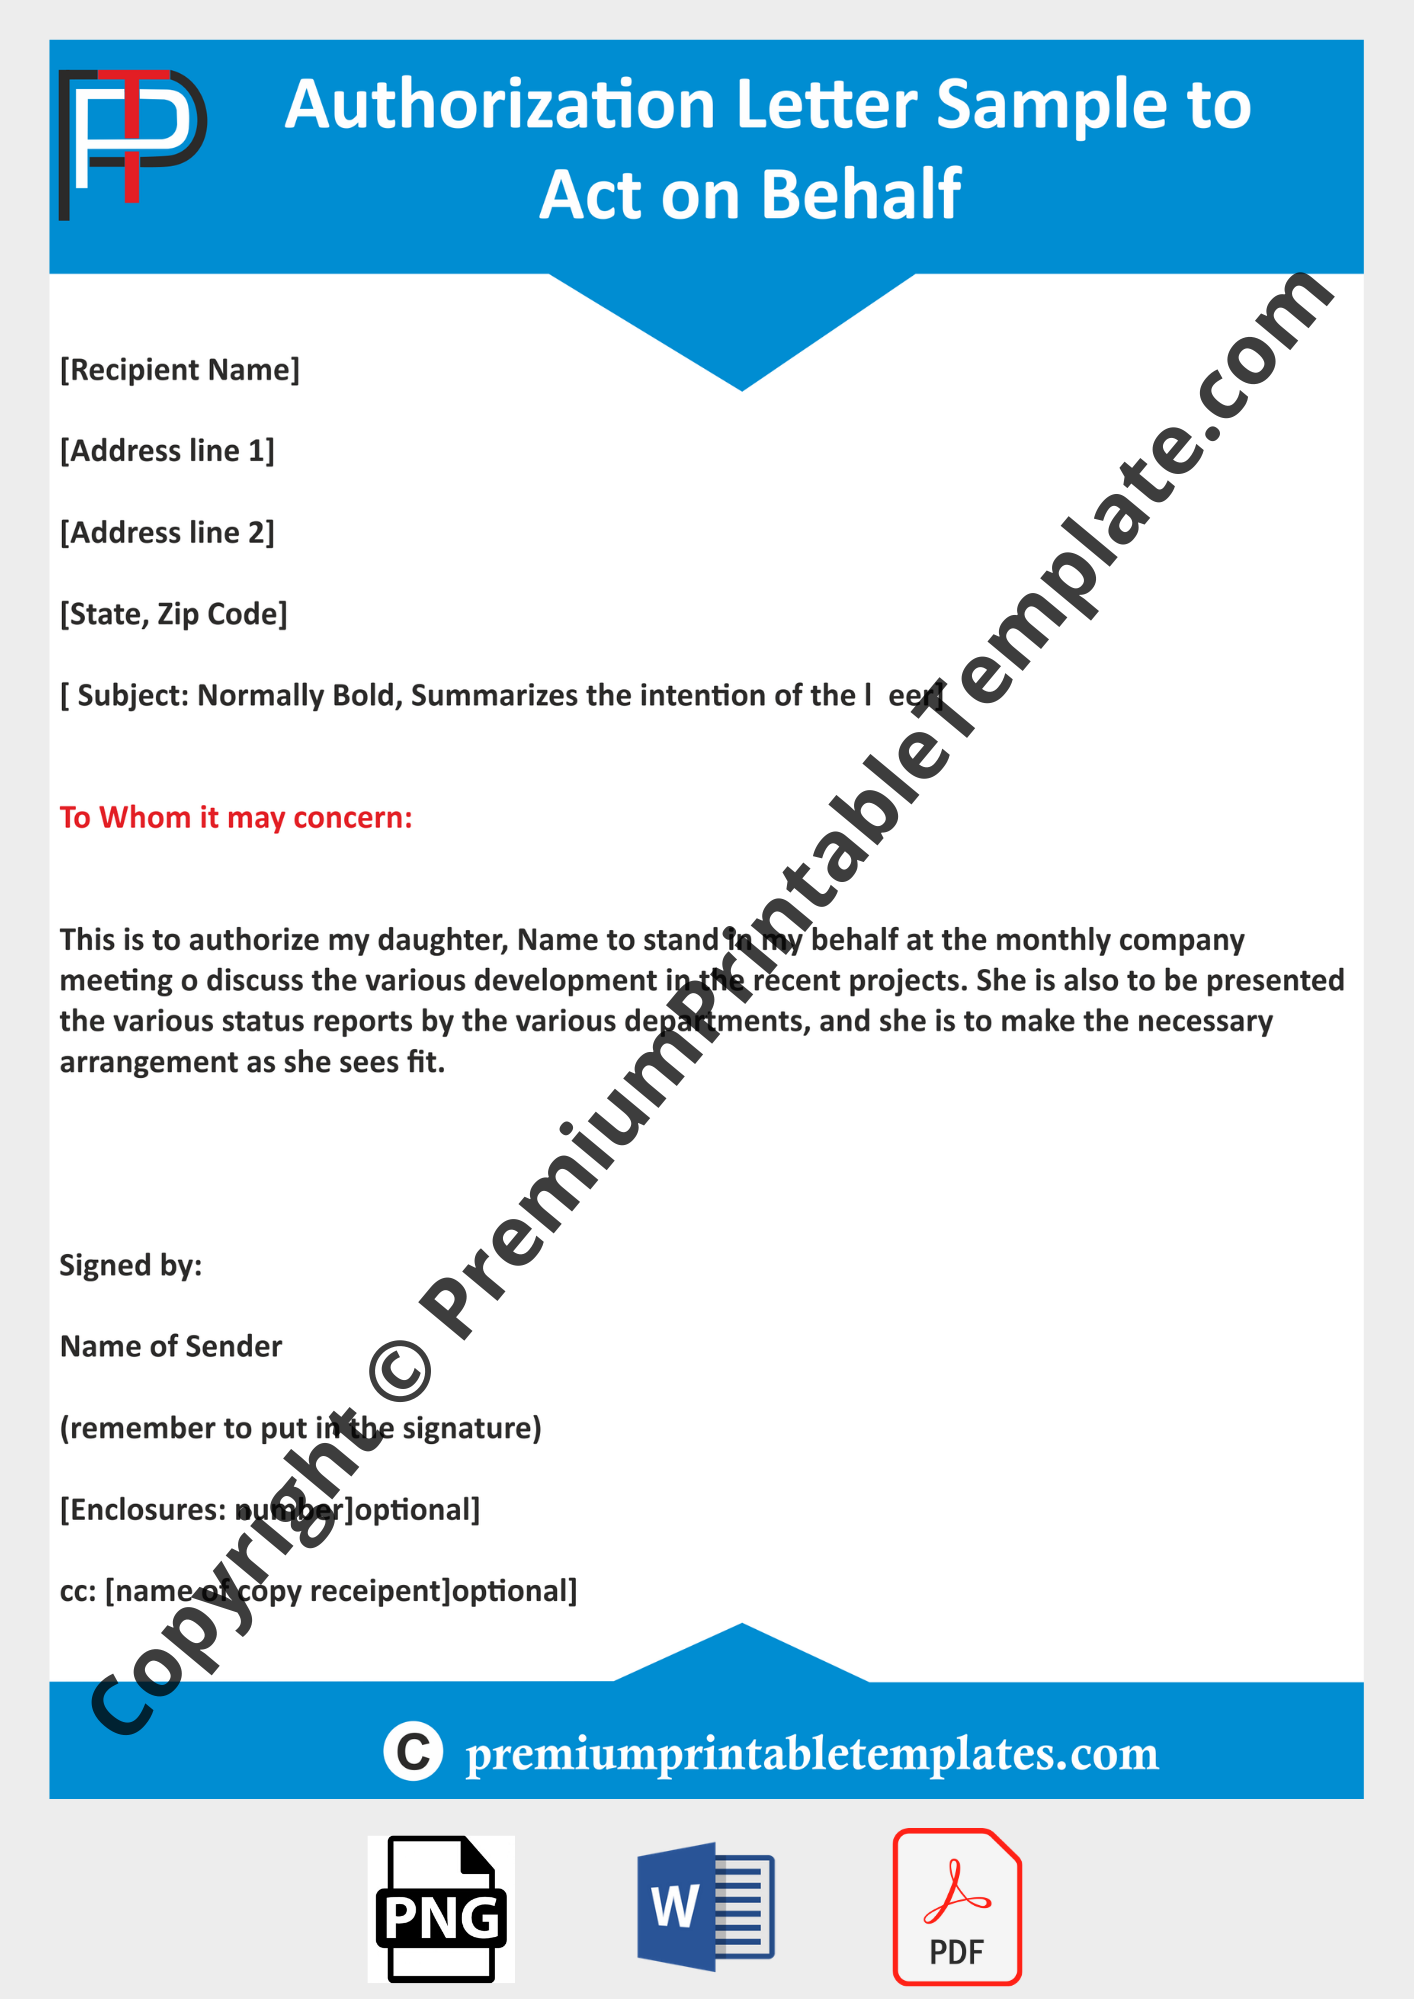 Letter Of Authorization Sample from premiumprintabletemplates.com